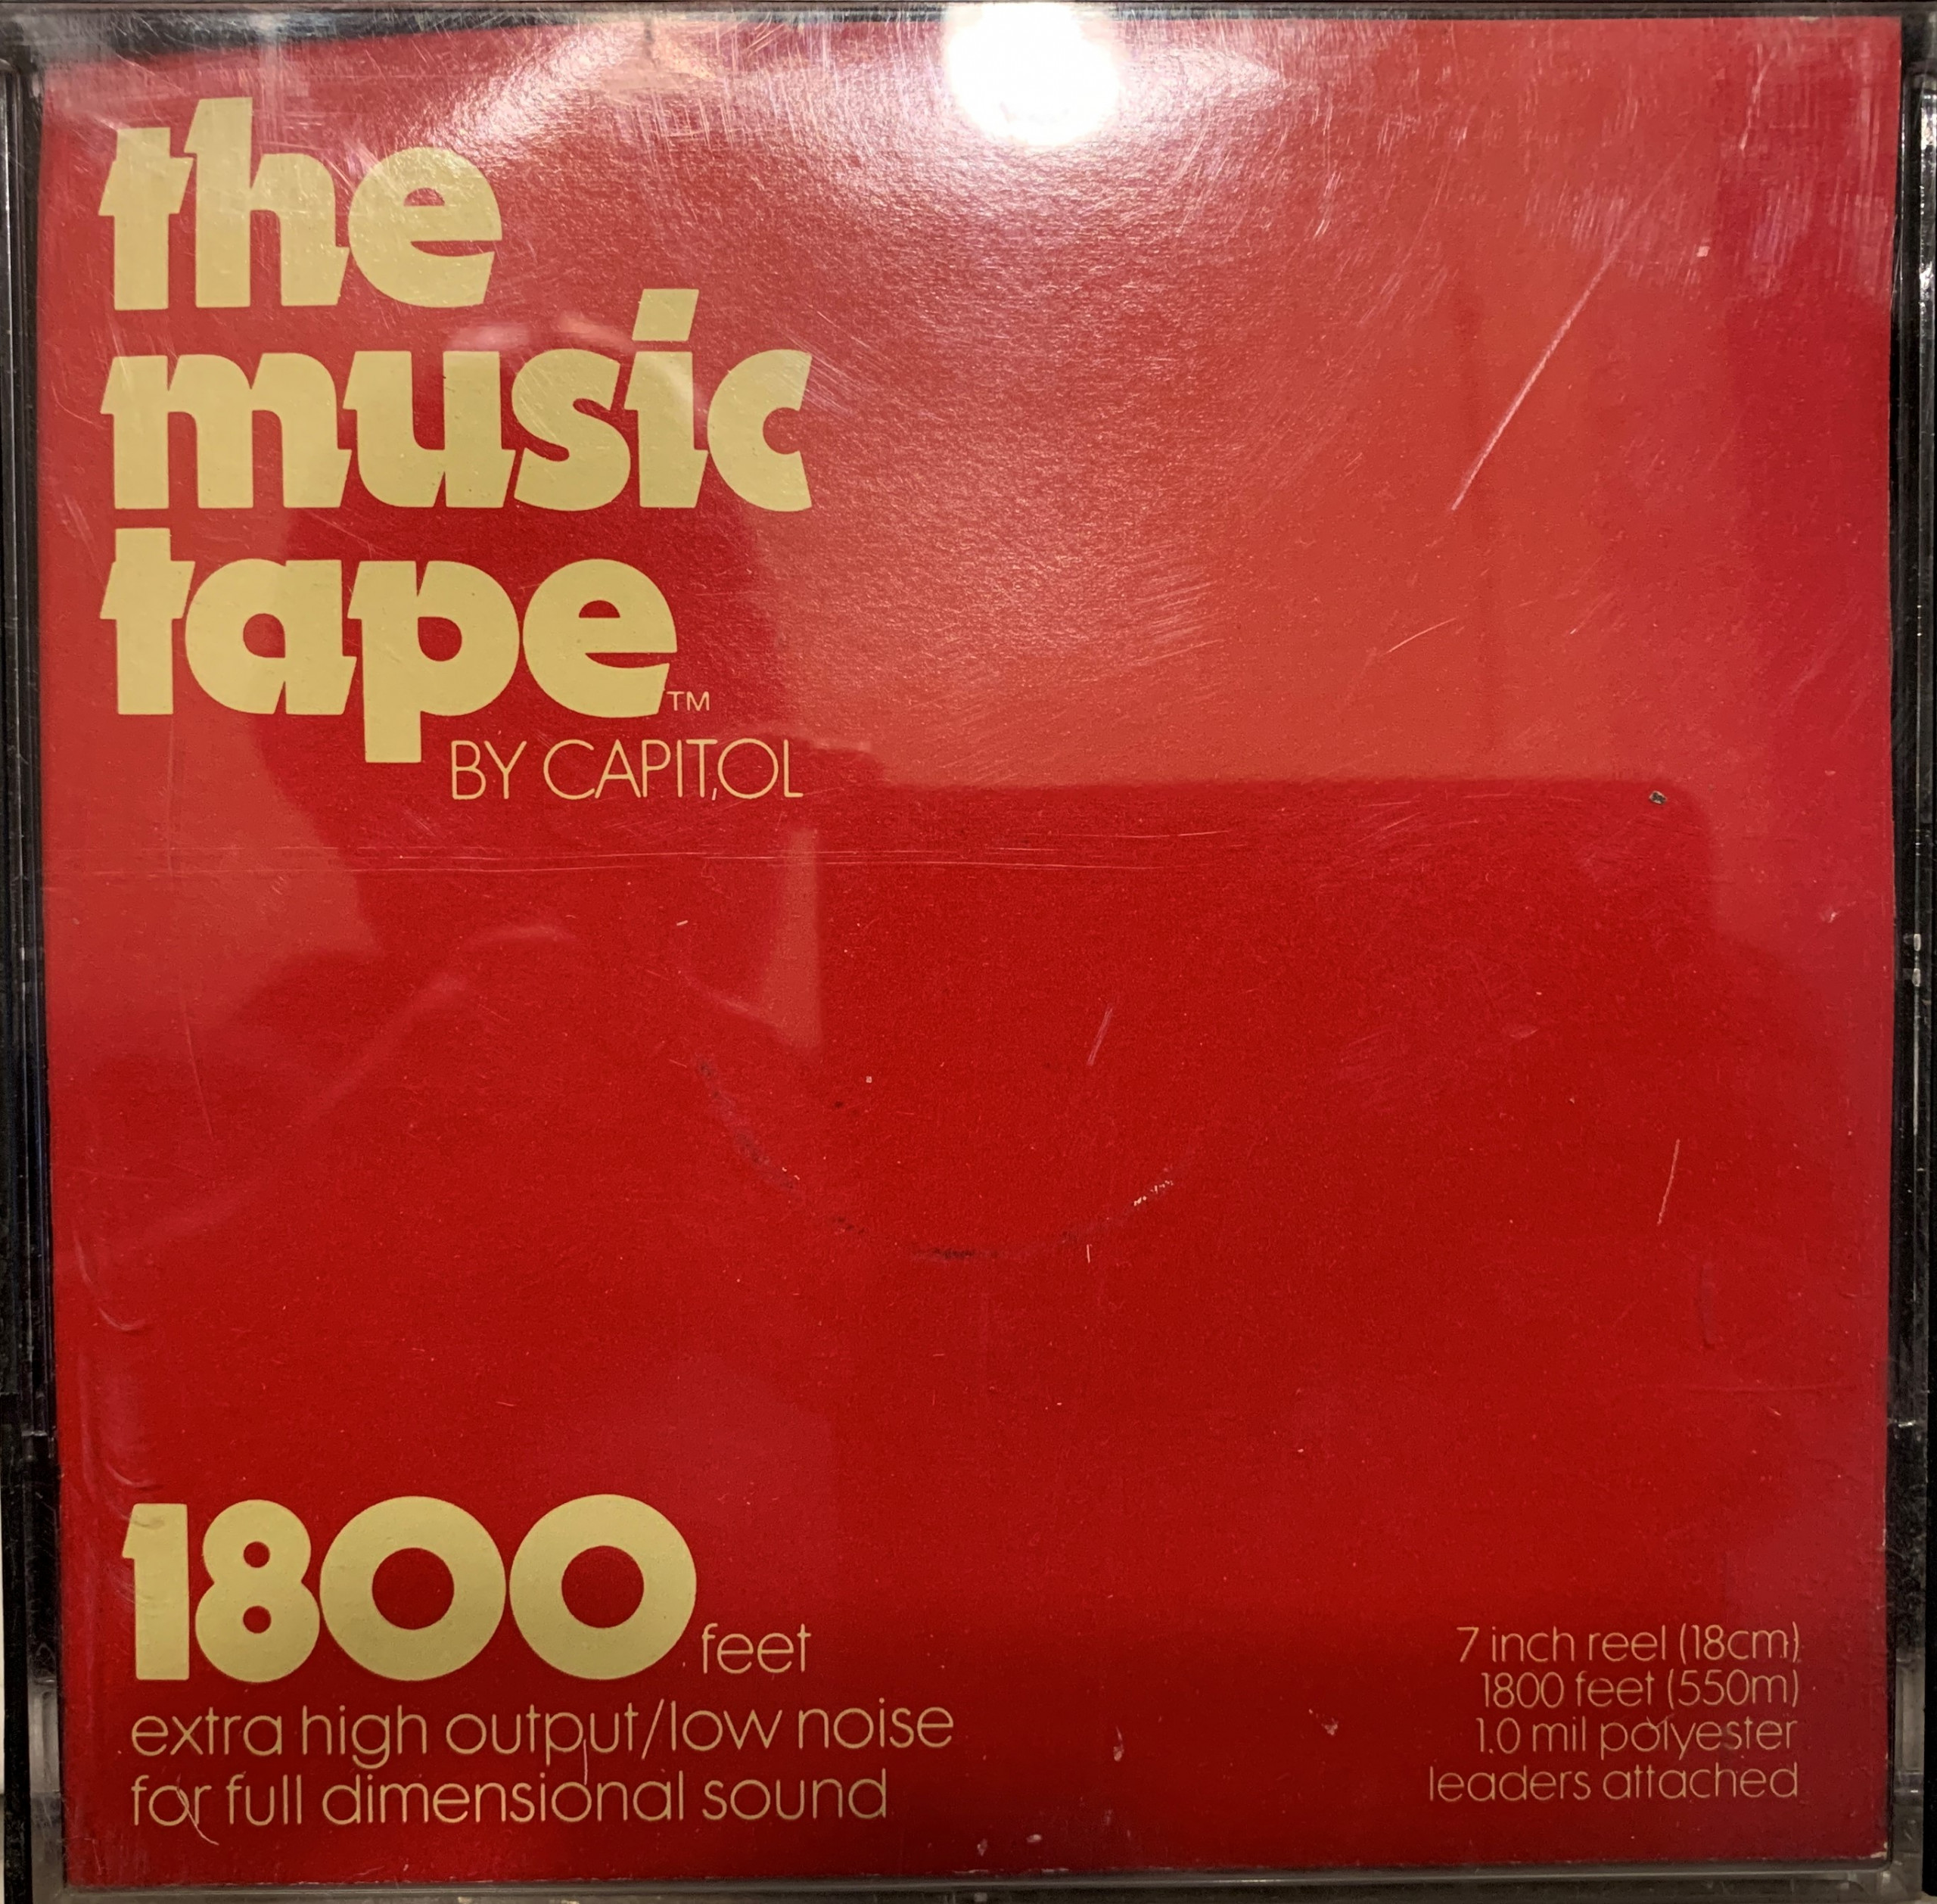 Capitol / Audiotape The Music Tape FDS, LP, 7″ Reel, 1800 ft - Reel to Reel  Warehouse